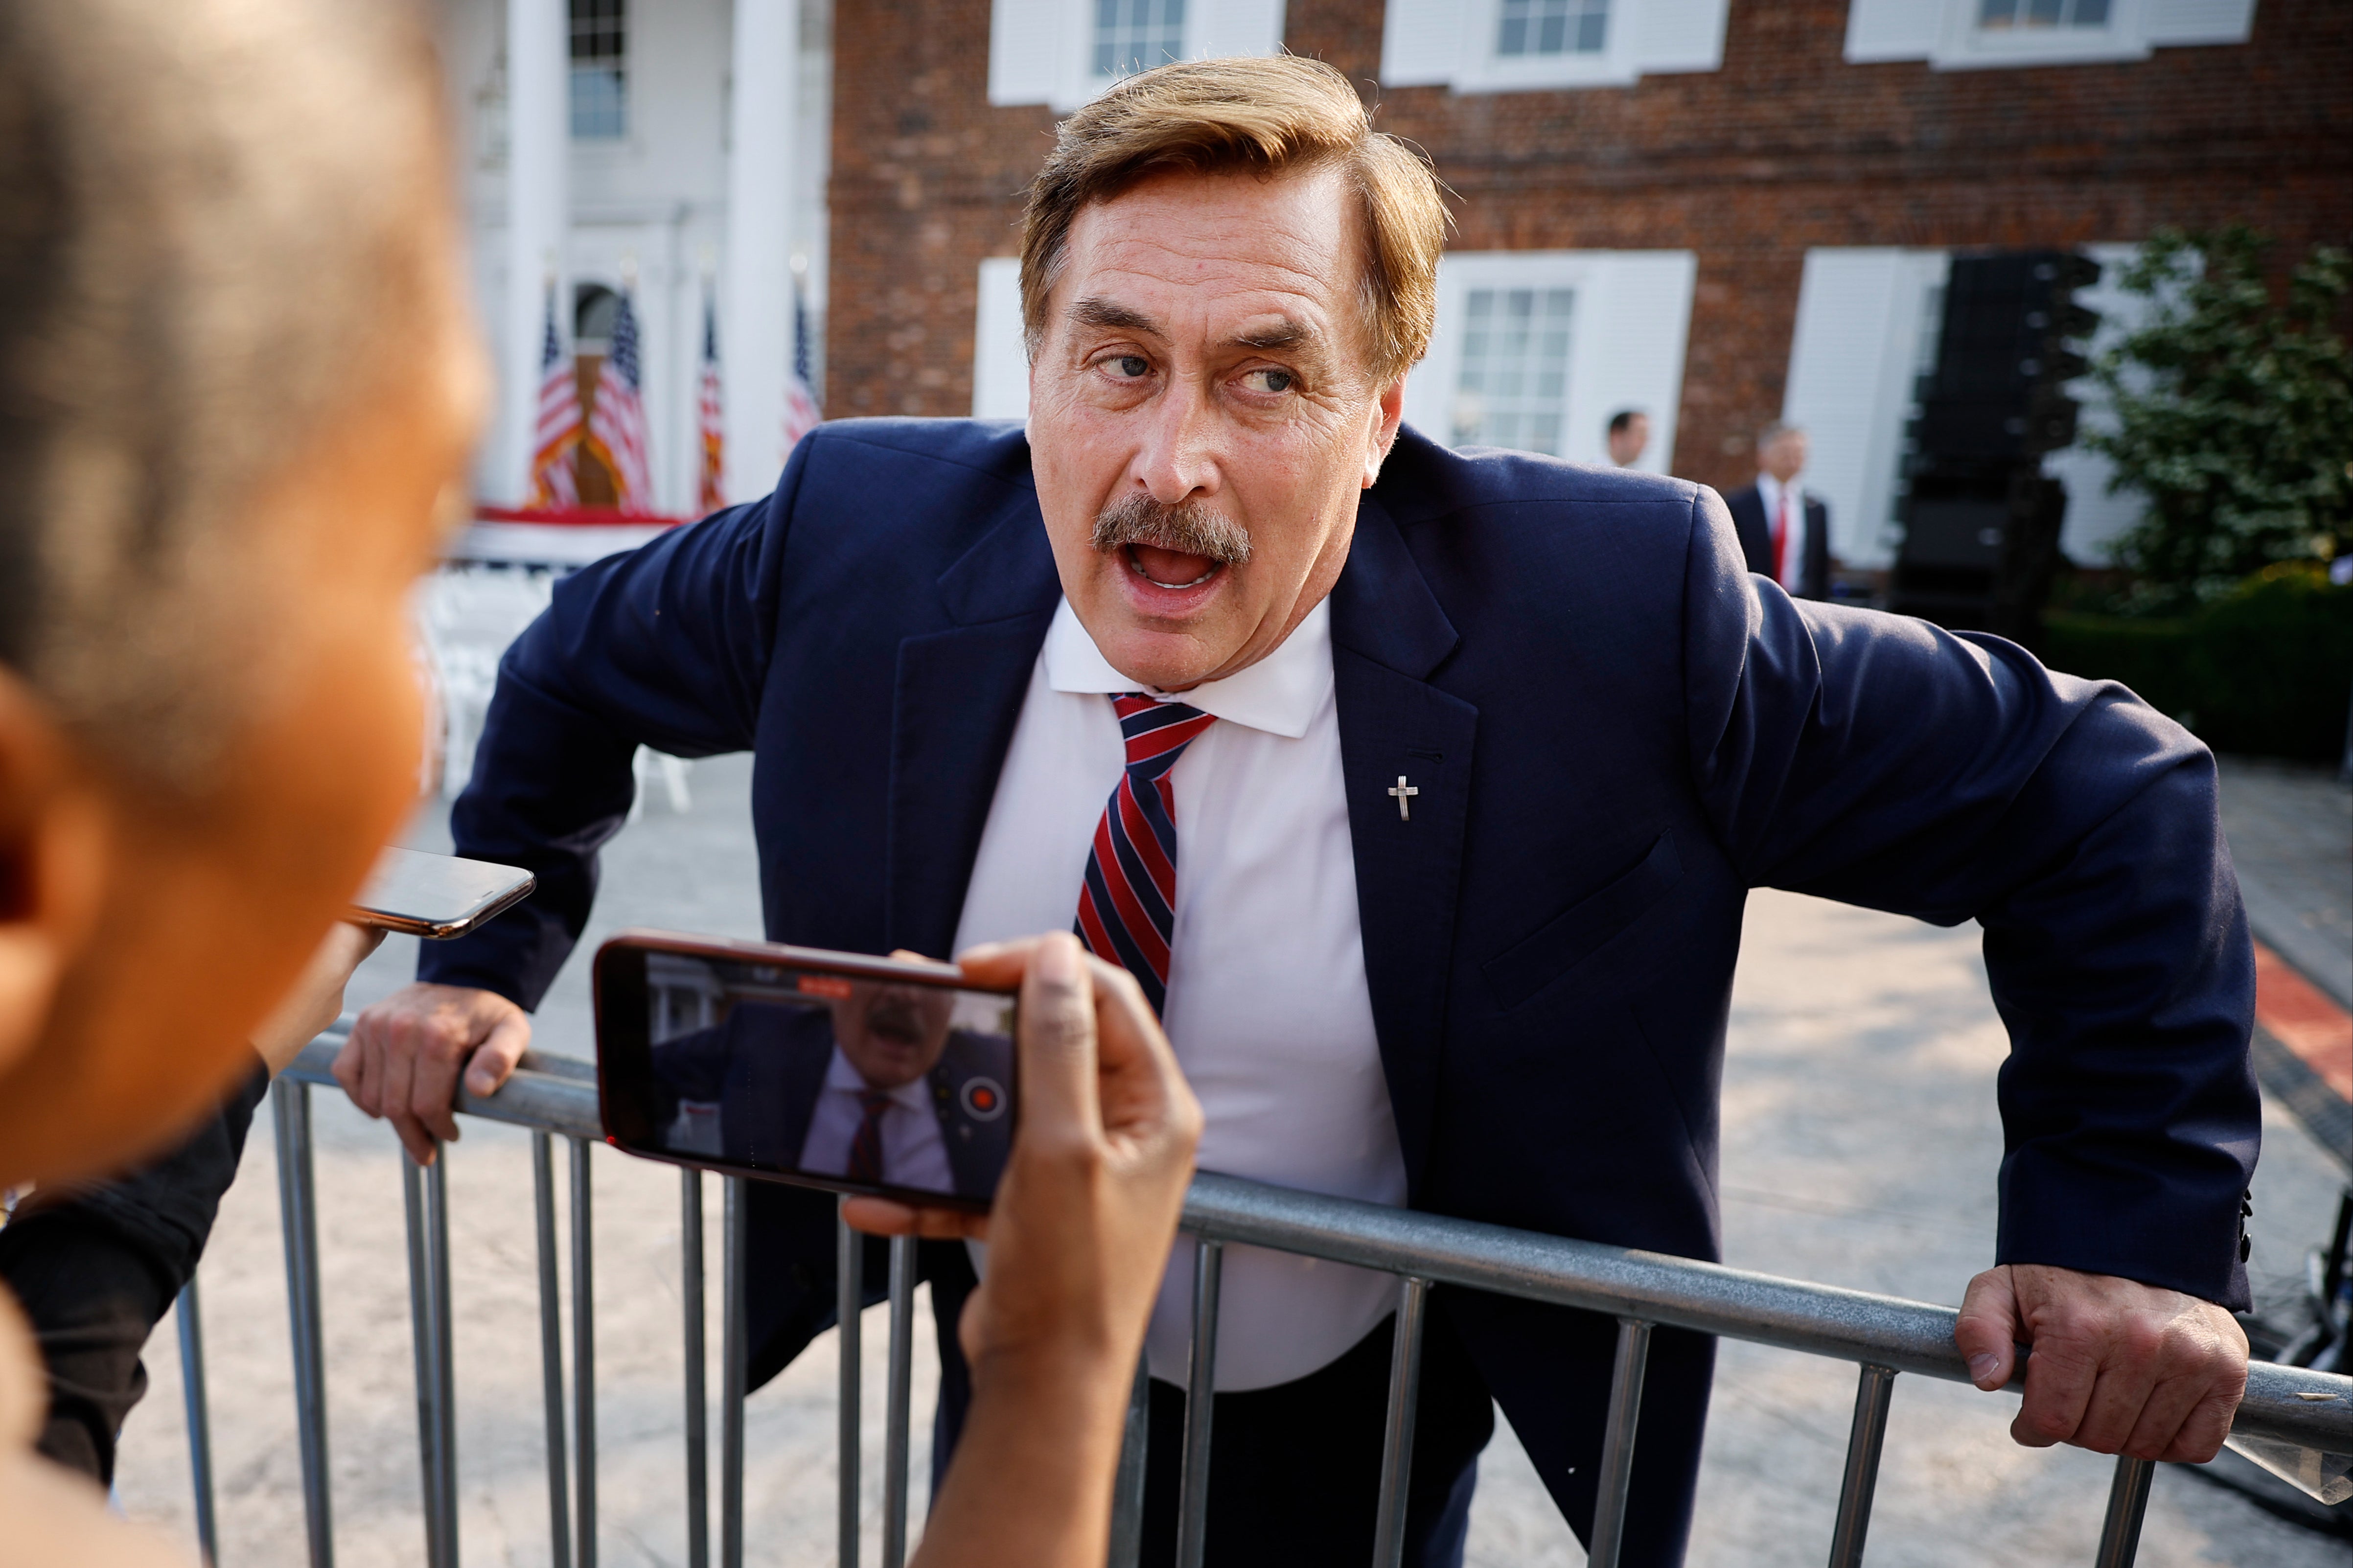 Businessman and election conspiracy theorist Mike Lindell talks with reporters outside the club house at the Trump National Golf Club on 13 June 2023